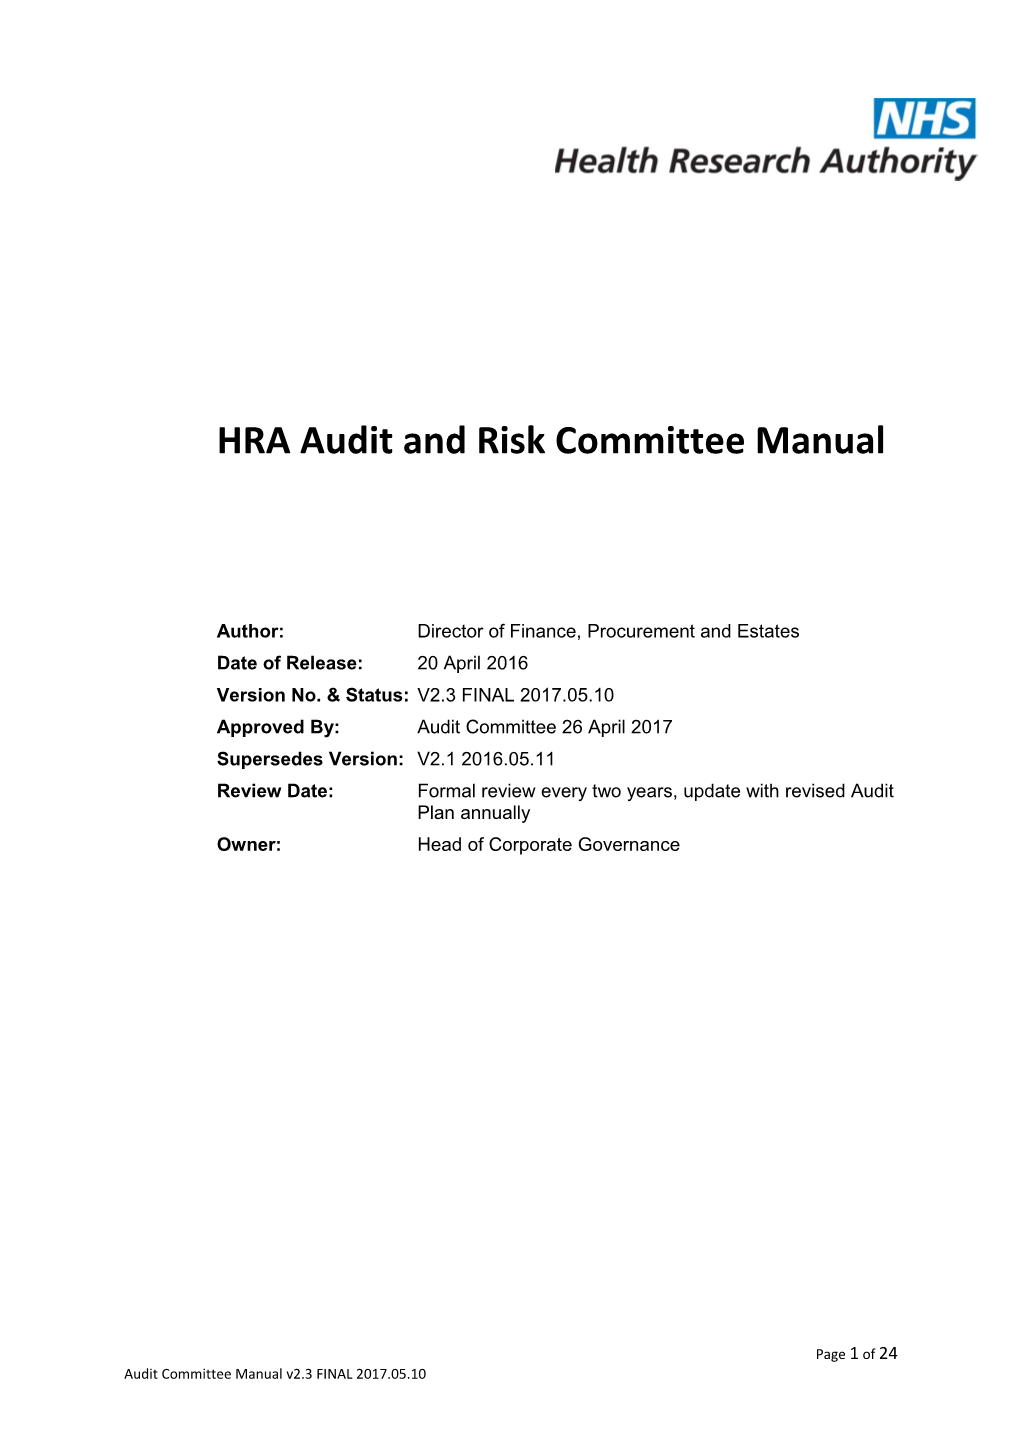 HRA Audit and Risk Committee Manual